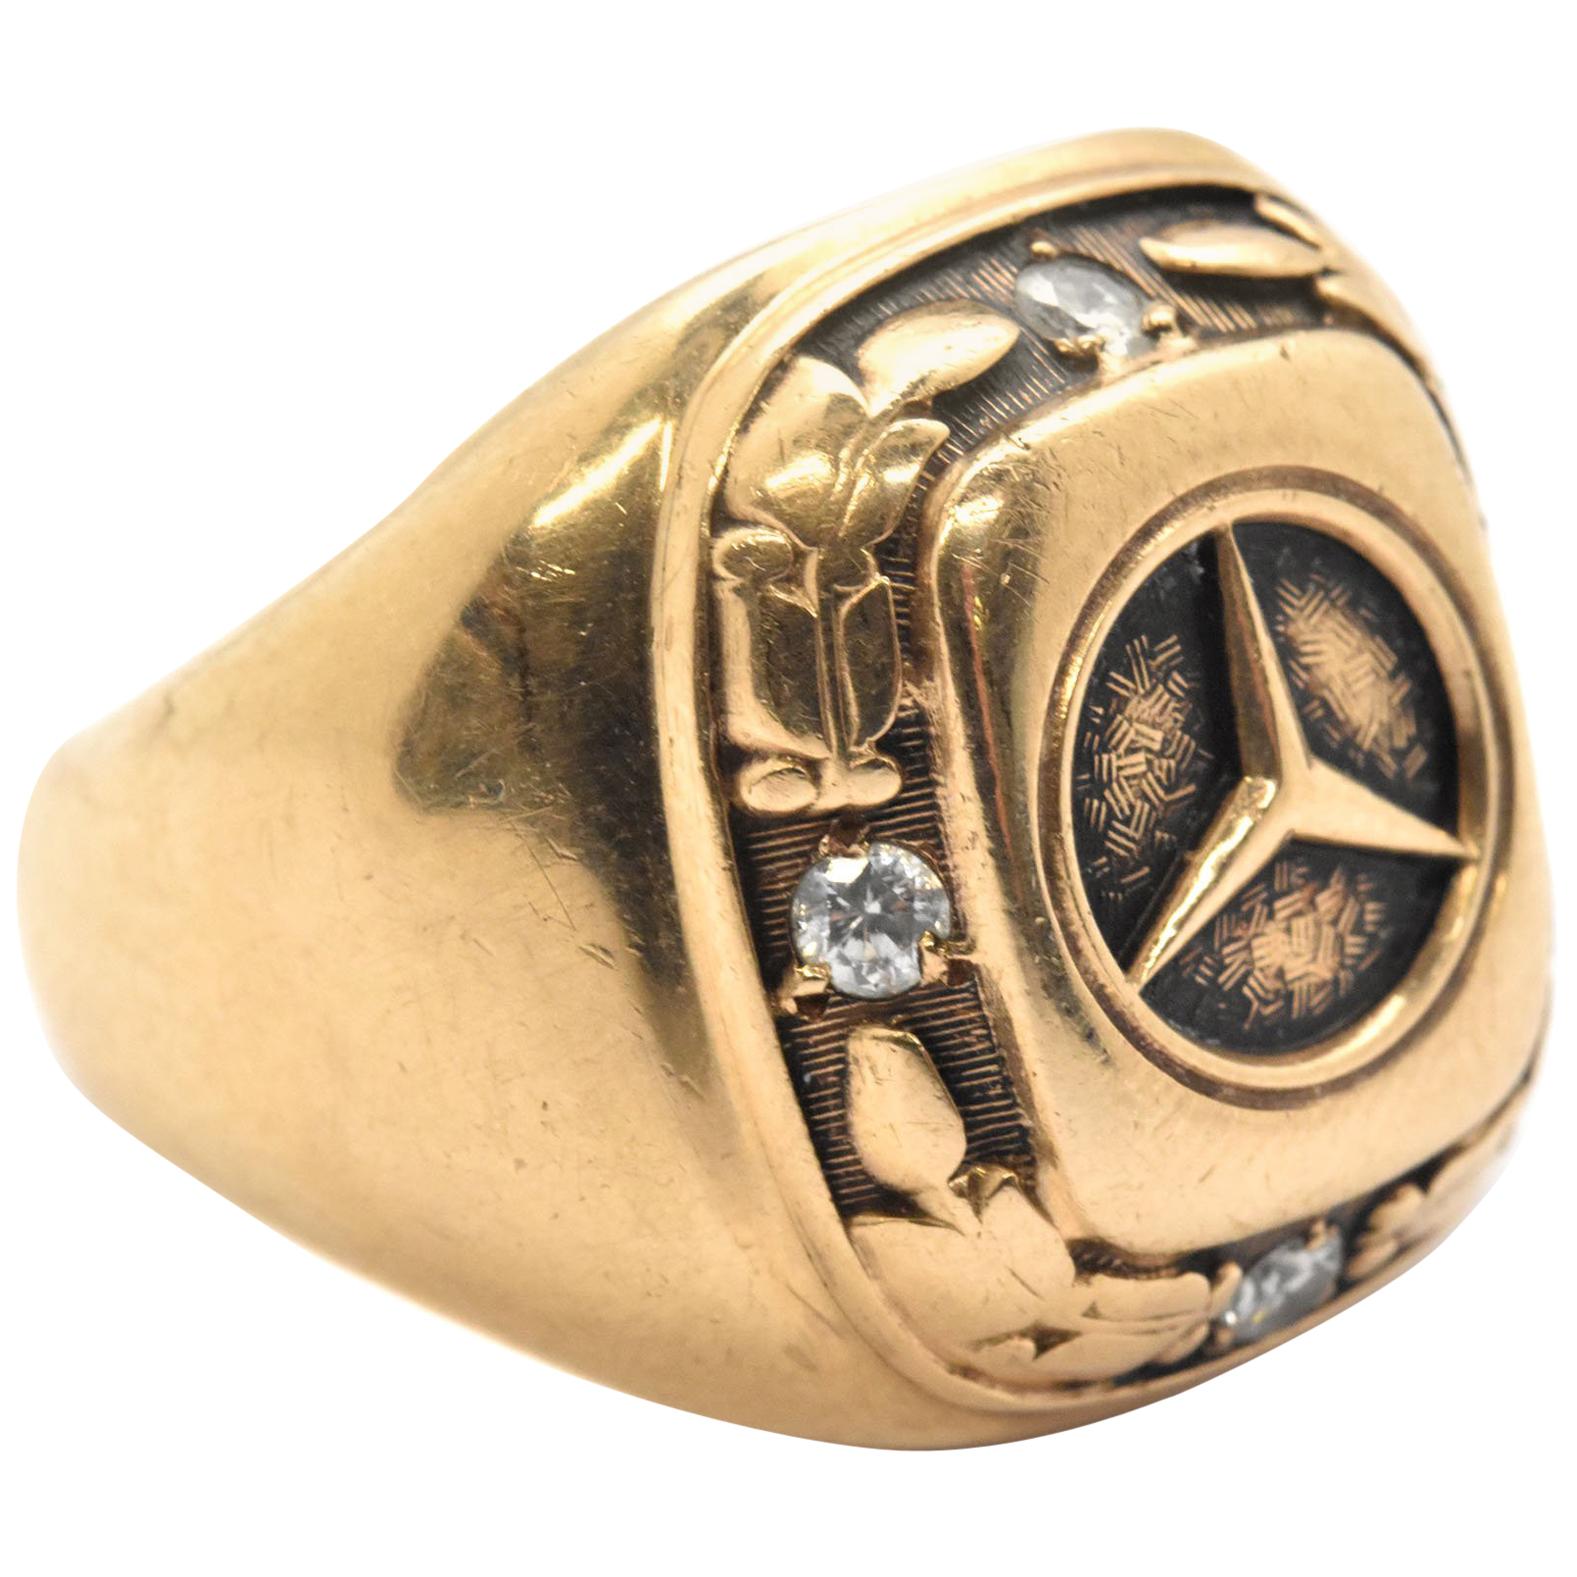 Buy DMJ Premium Heavy Mercedes Gold Look Finely Detailed Handmade Ring For  Men Brass Gold Plated Ring (21) at Amazon.in